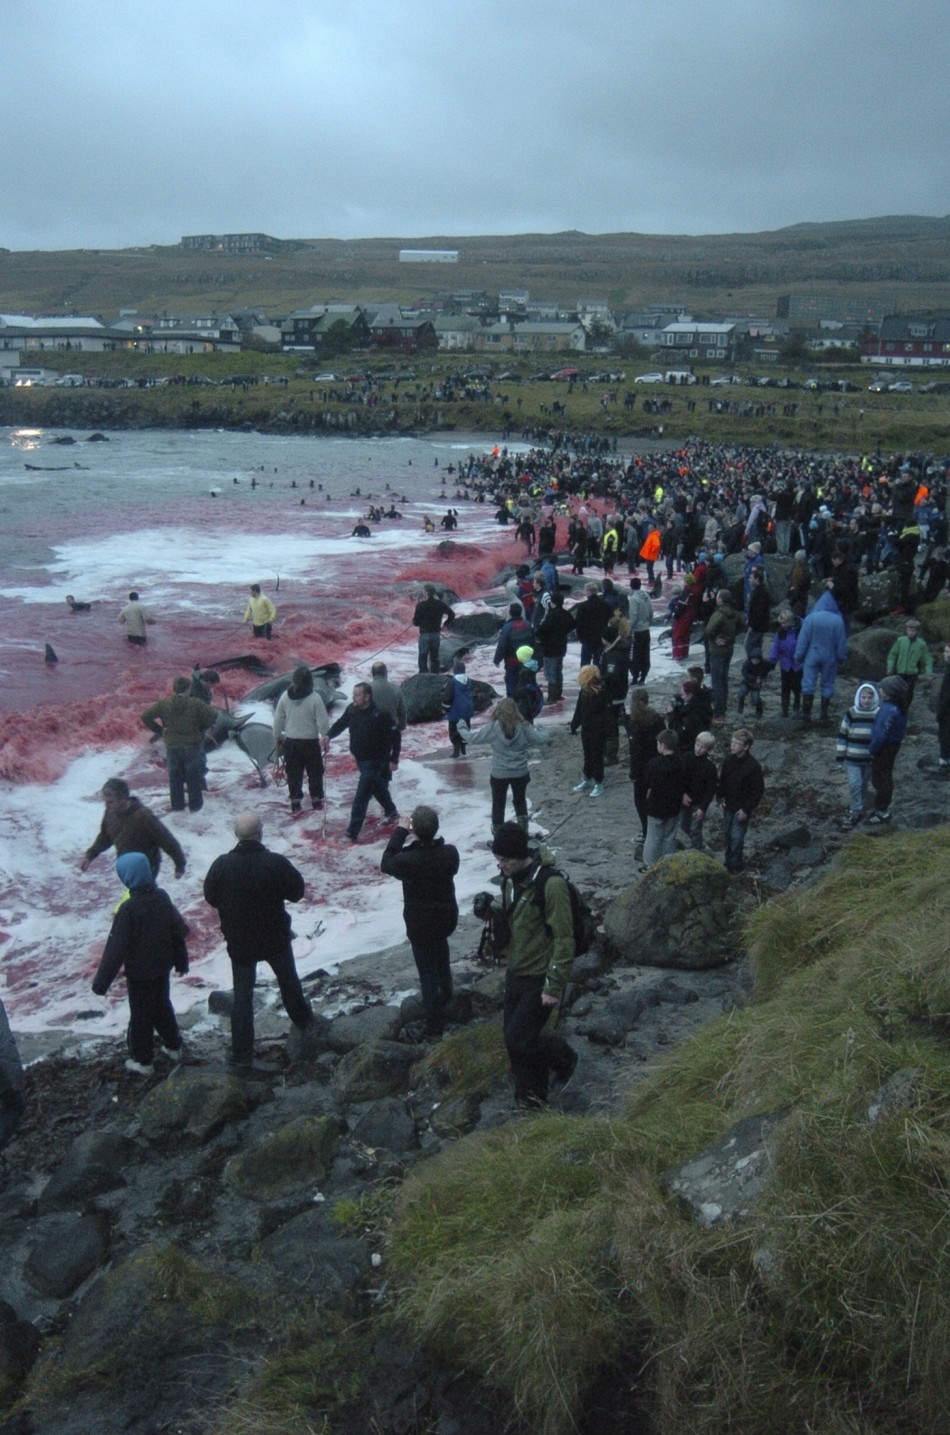 Inhabitants of the Faroe Islands have taken part in their traditional Grindadrap  a gruesome hunt for pilot whales.